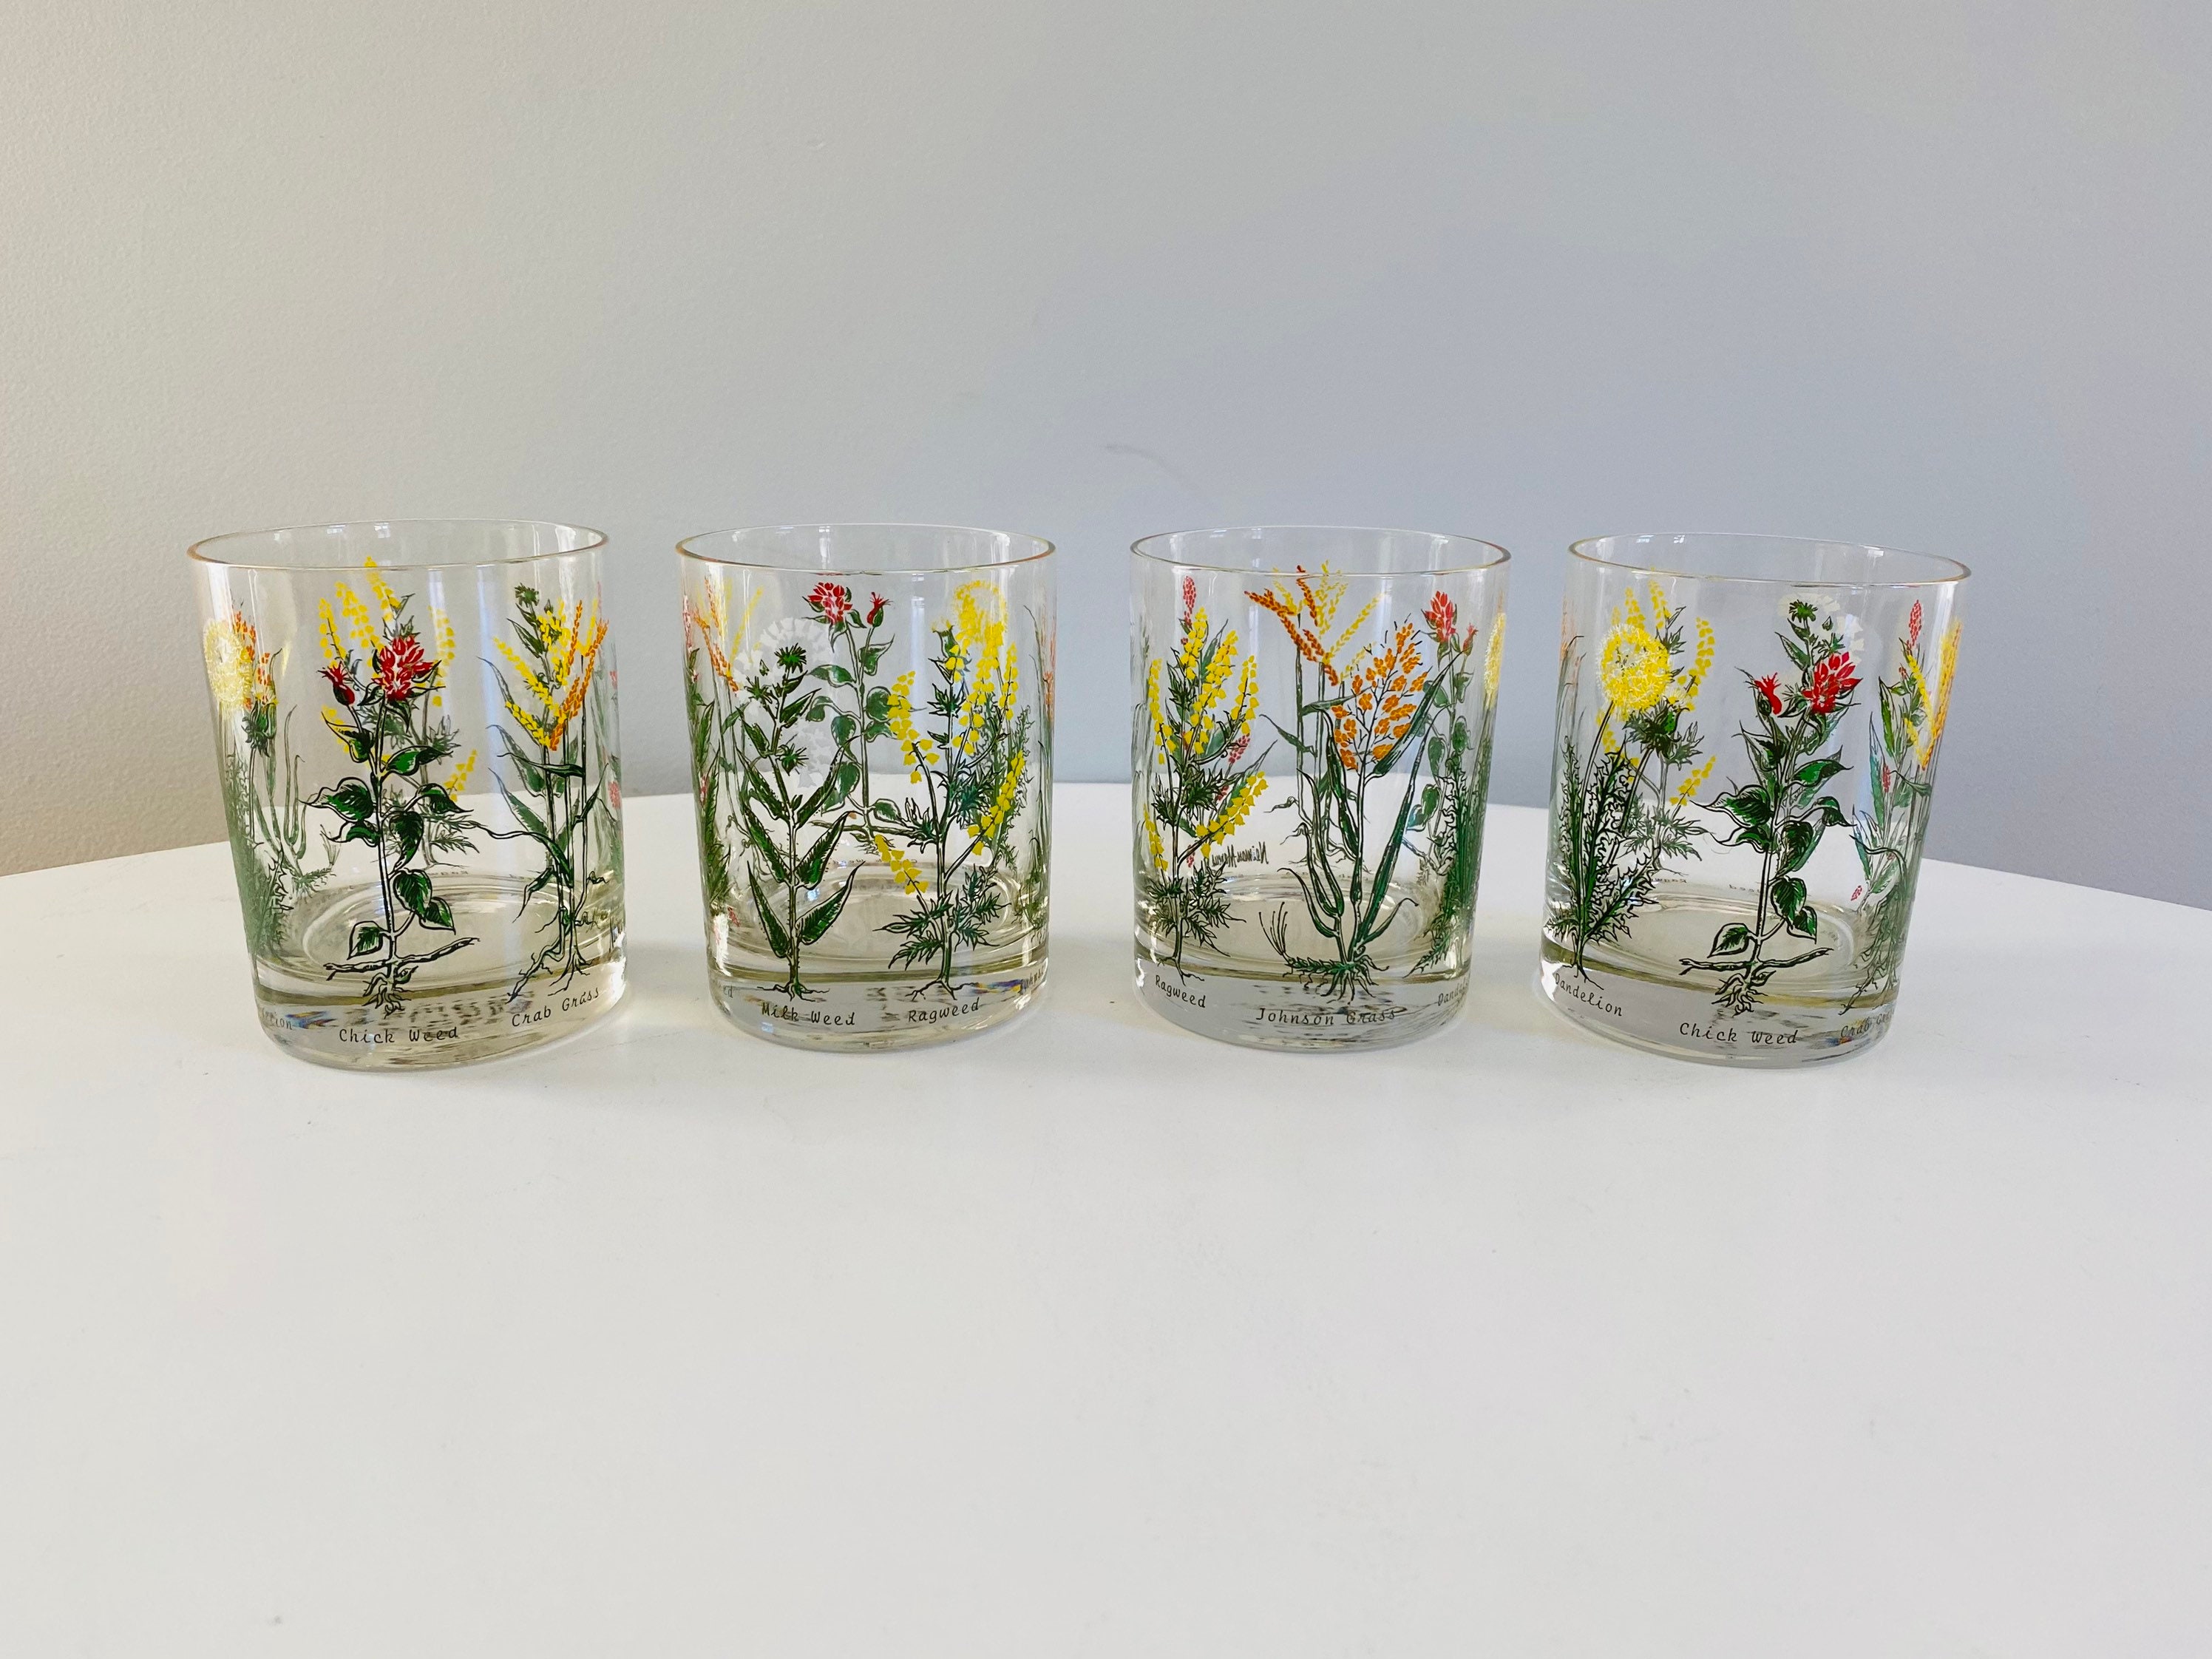 Whisky Glasses NEVER USED Neiman Marcus Set of 6 Vintage